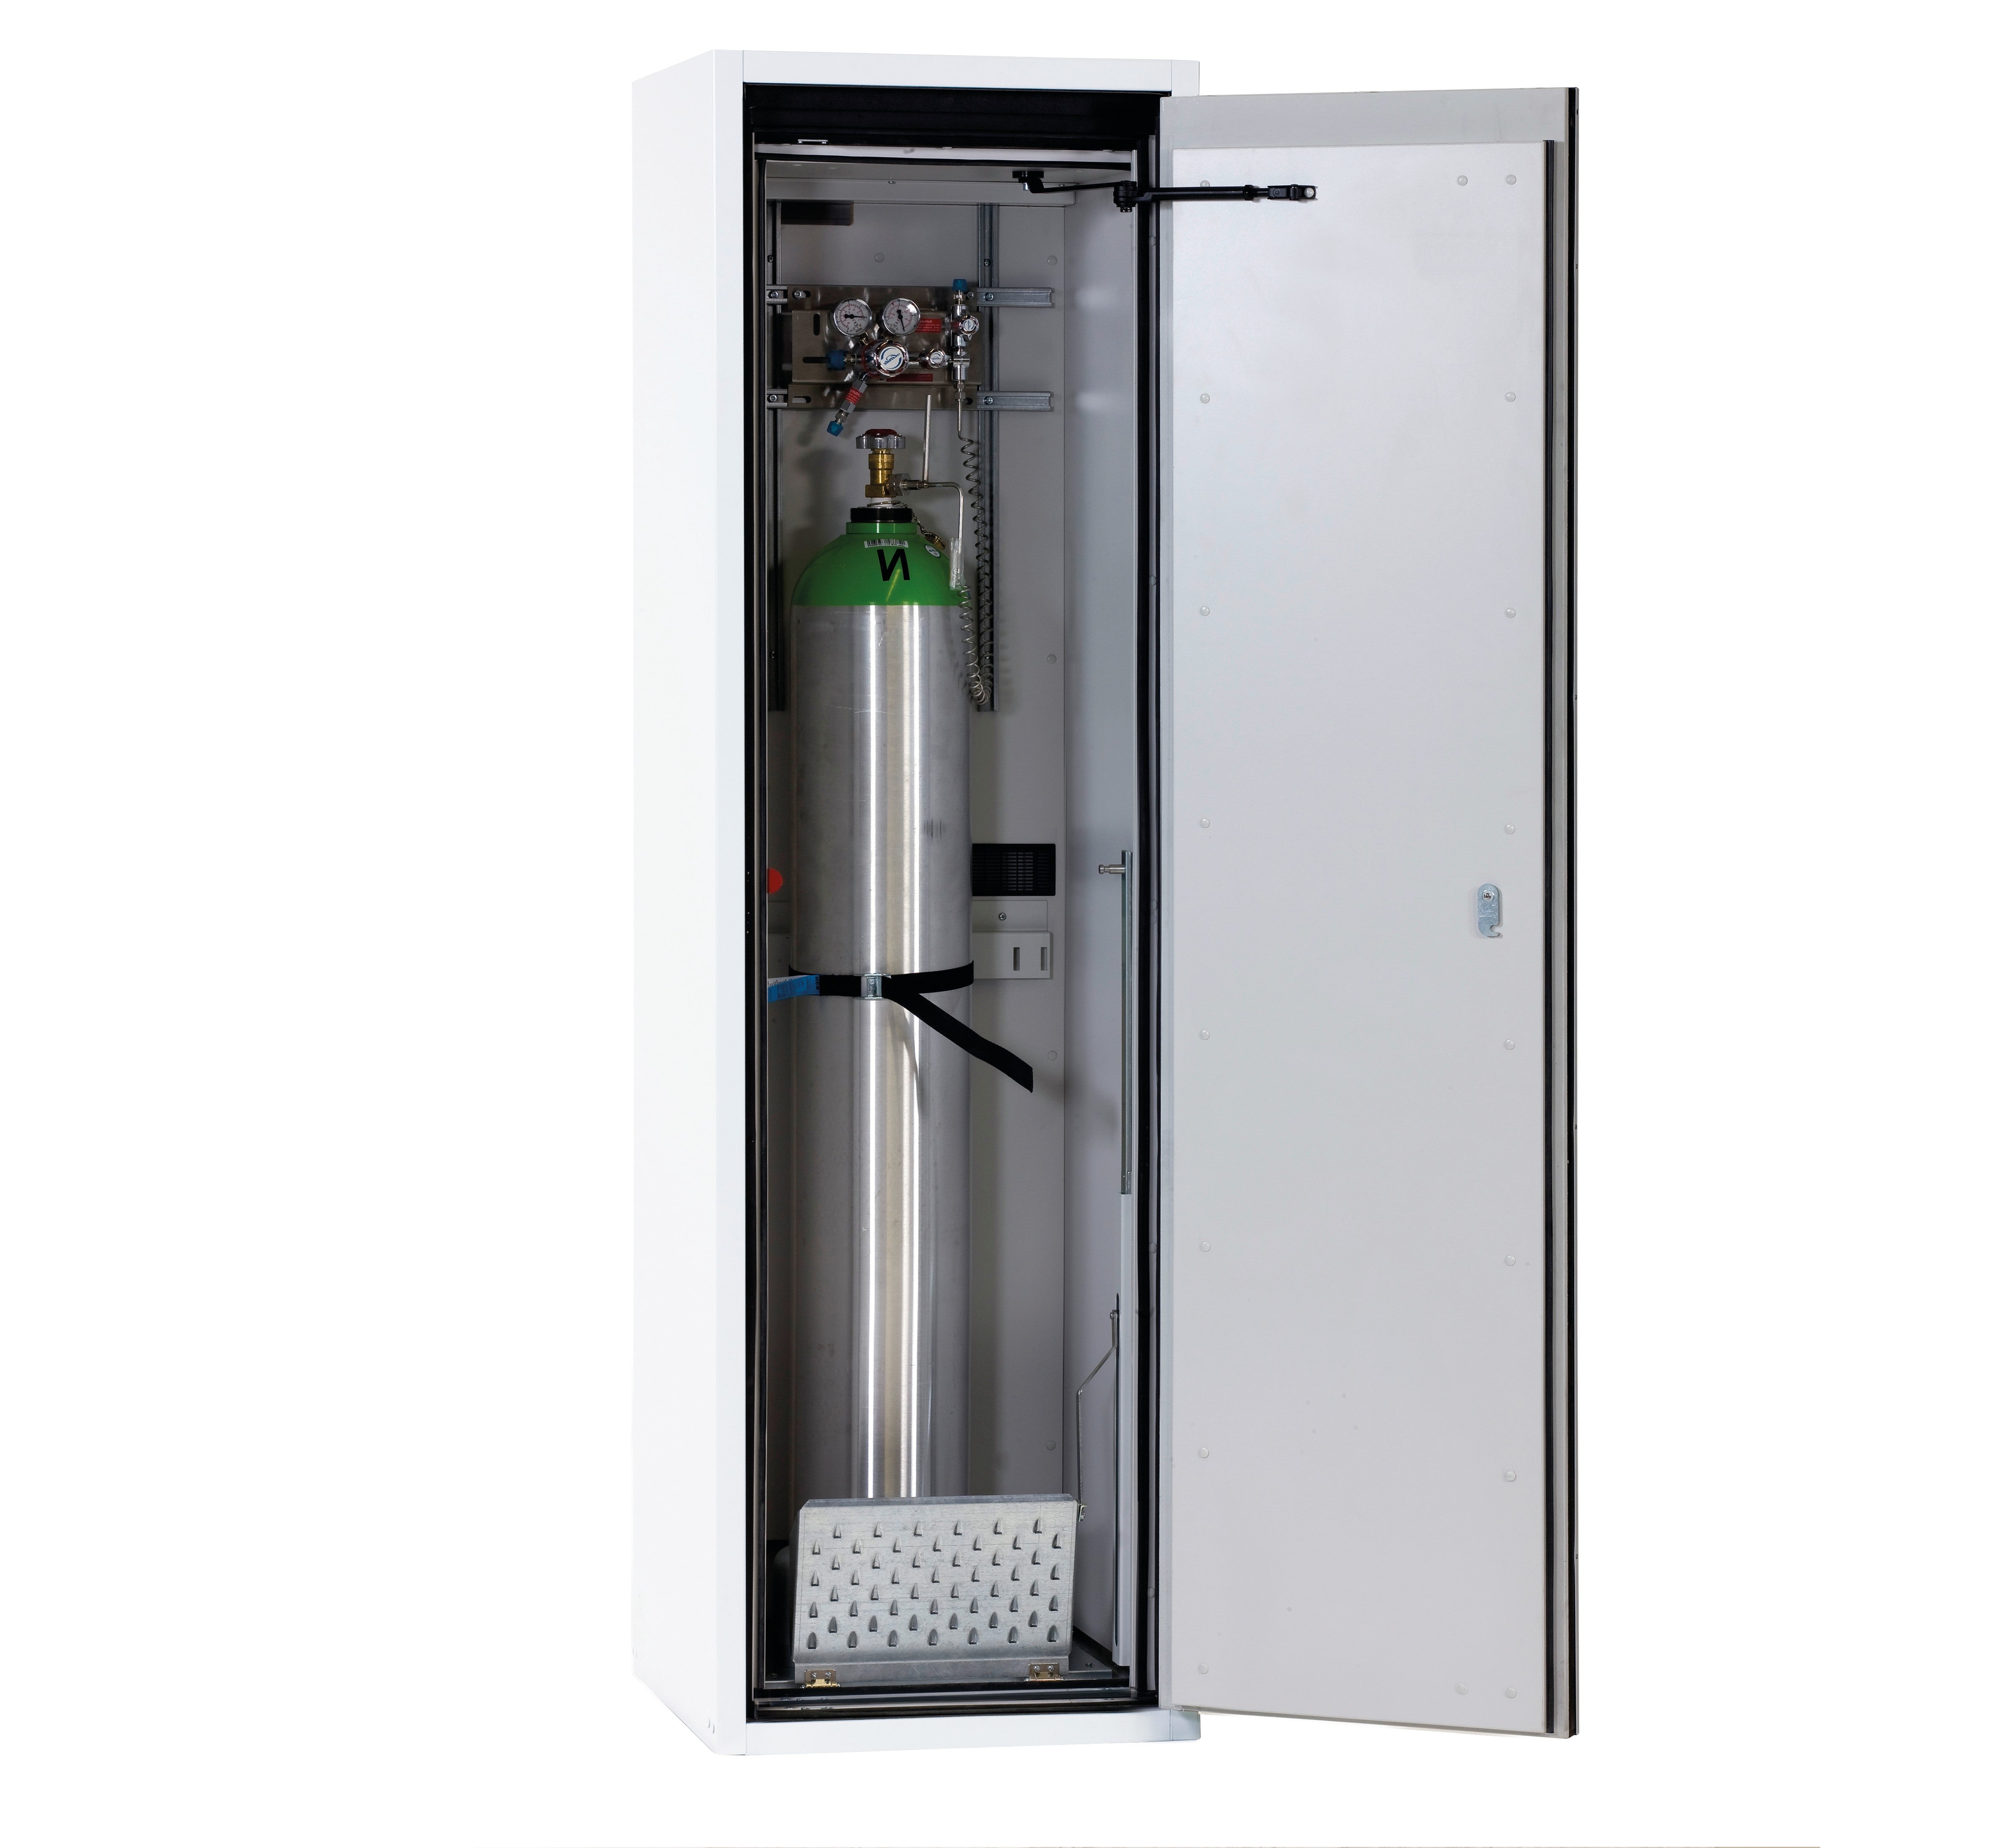 Type 90 compressed gas bottle cabinet G-ULTIMATE-90 model G90.205.060.R in laboratory white (similar to RAL 9016) with comfortable interior fittings for 1x compressed gas bottles of 50 liters each